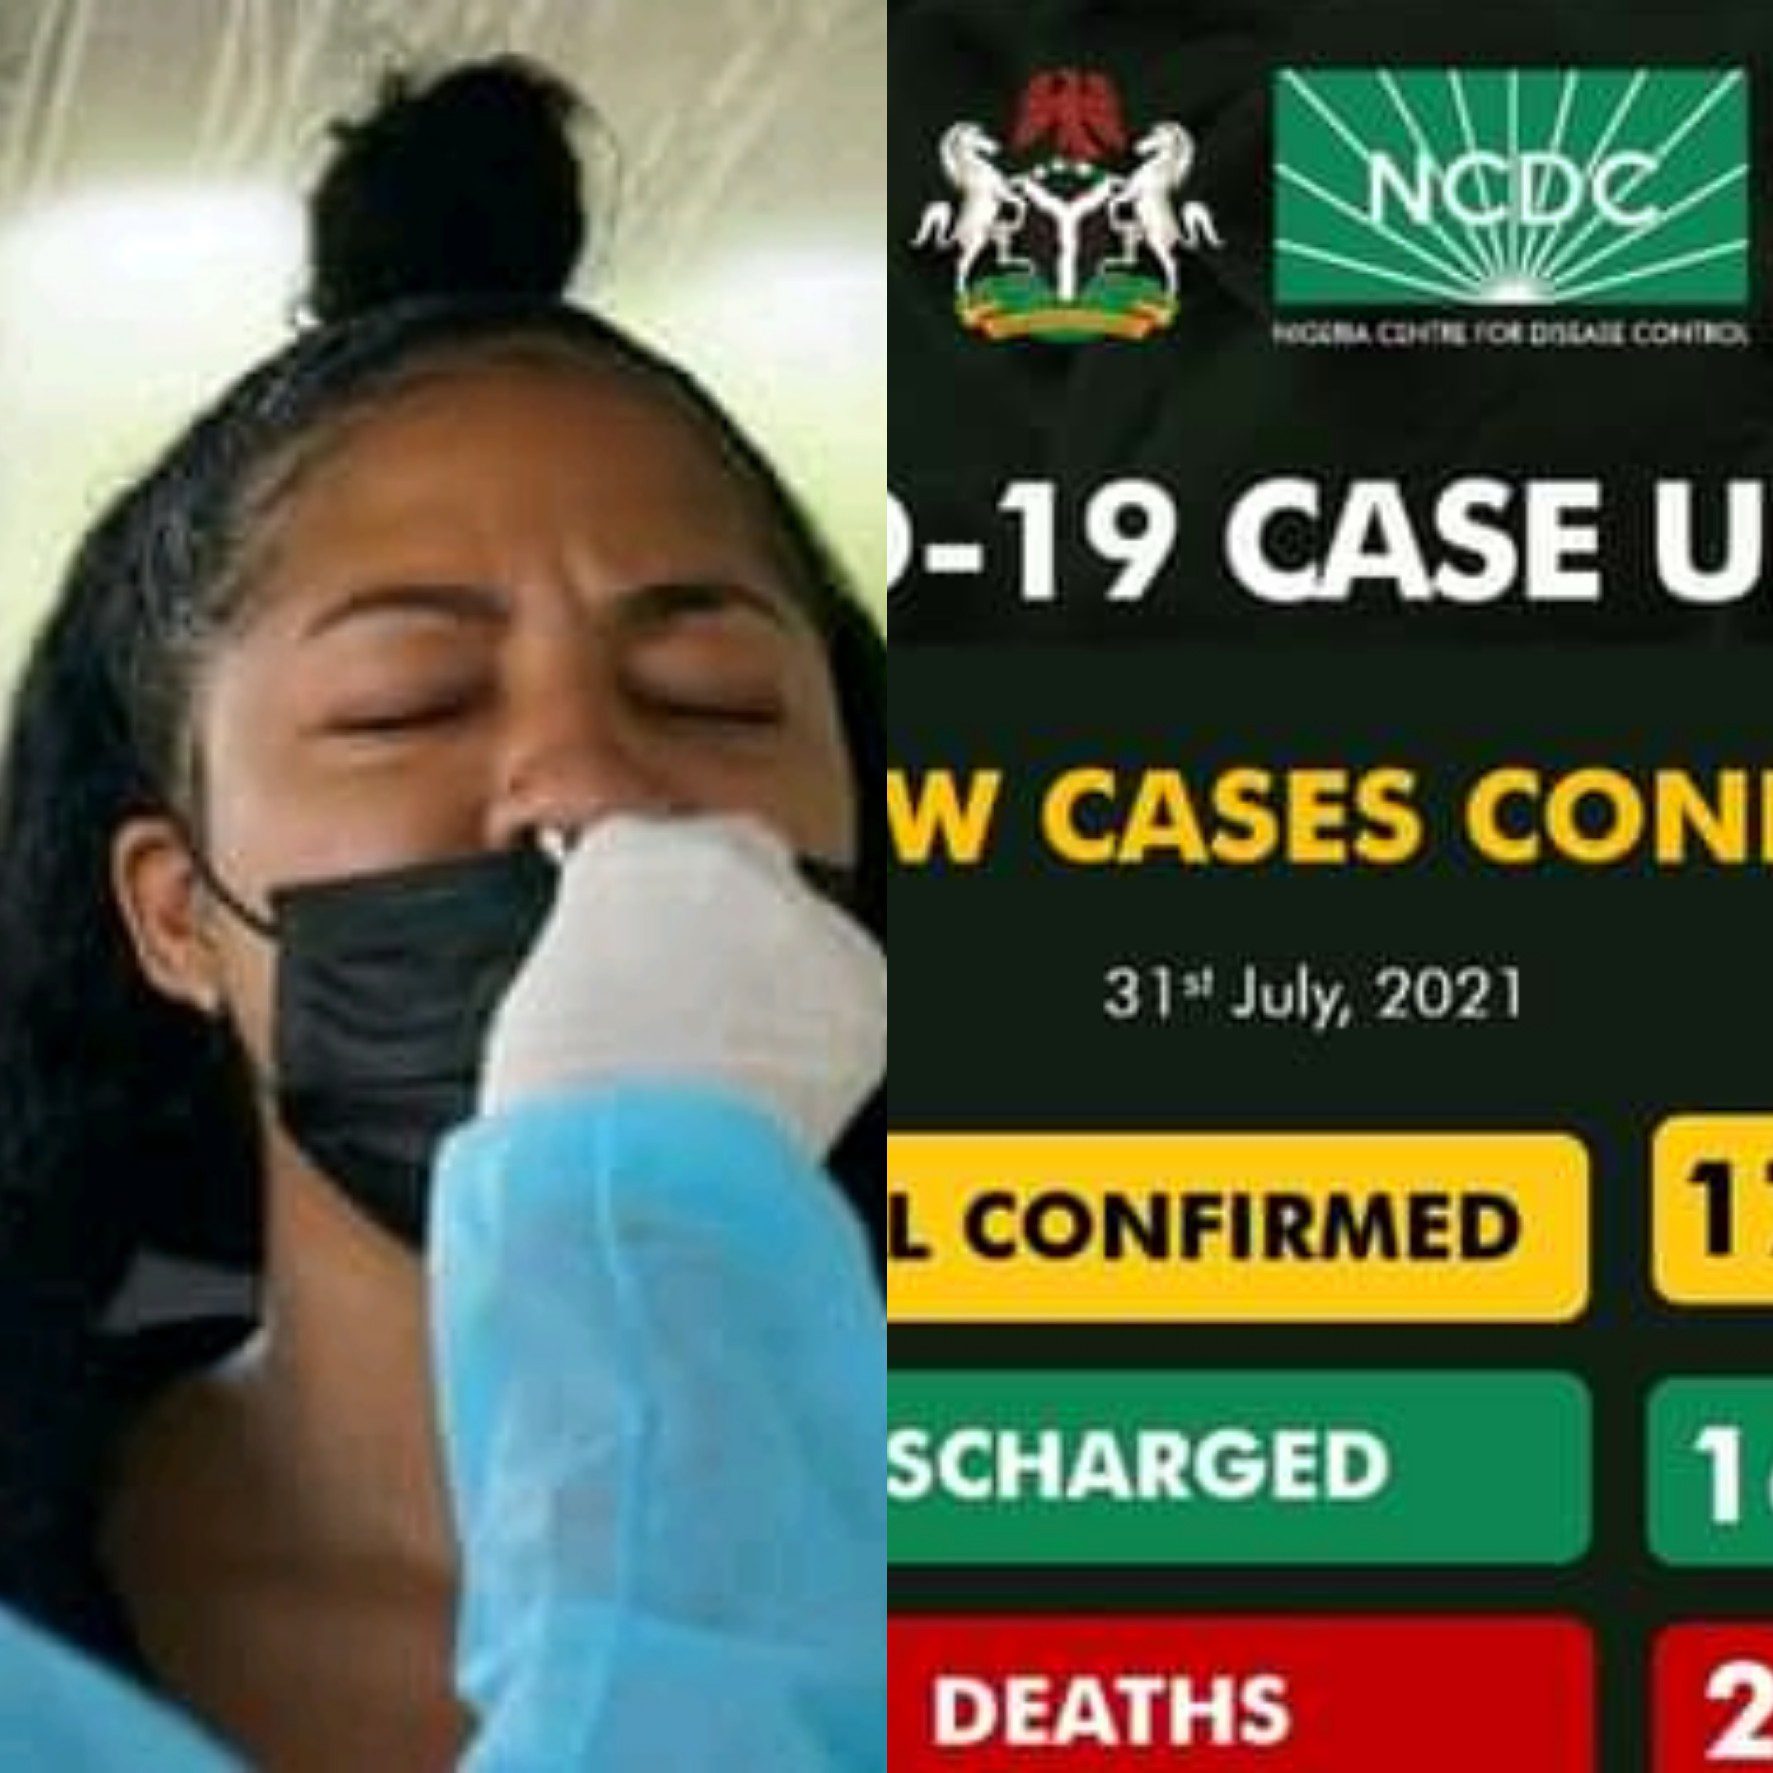 NCDC: New Covid 19 cases recorded in the country